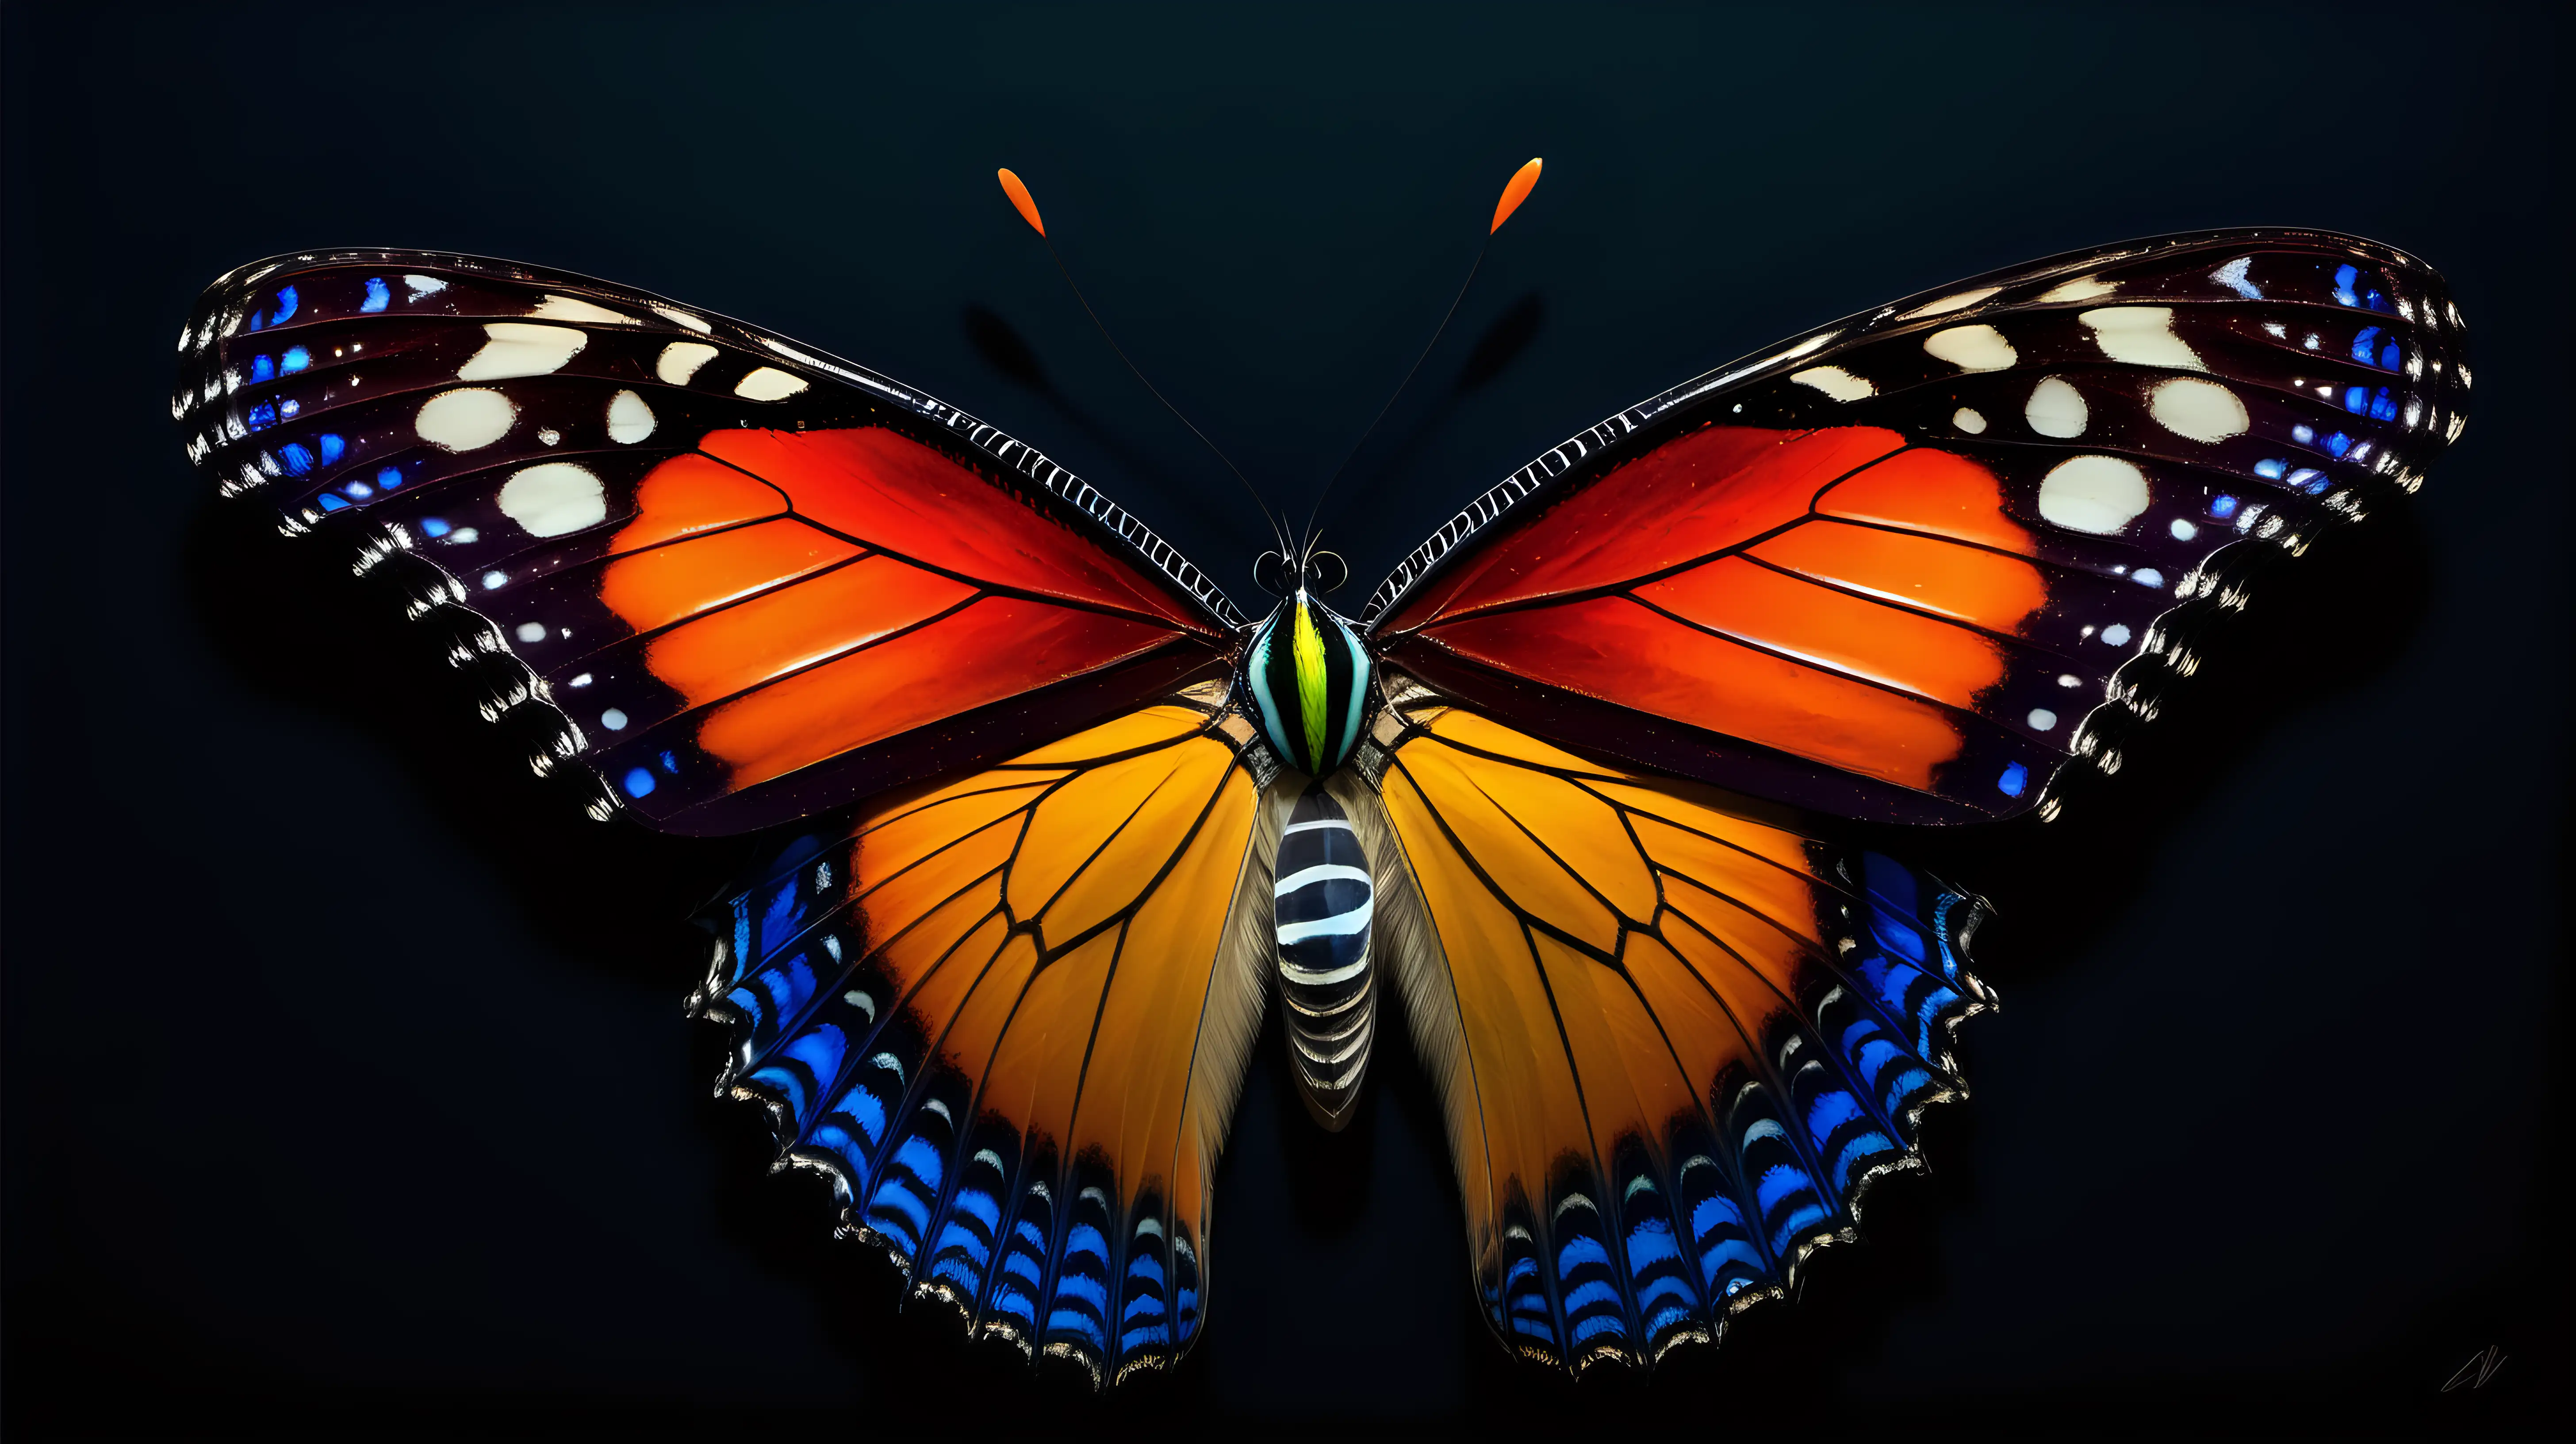 Vibrant Butterfly Wings Emerging in Darkness